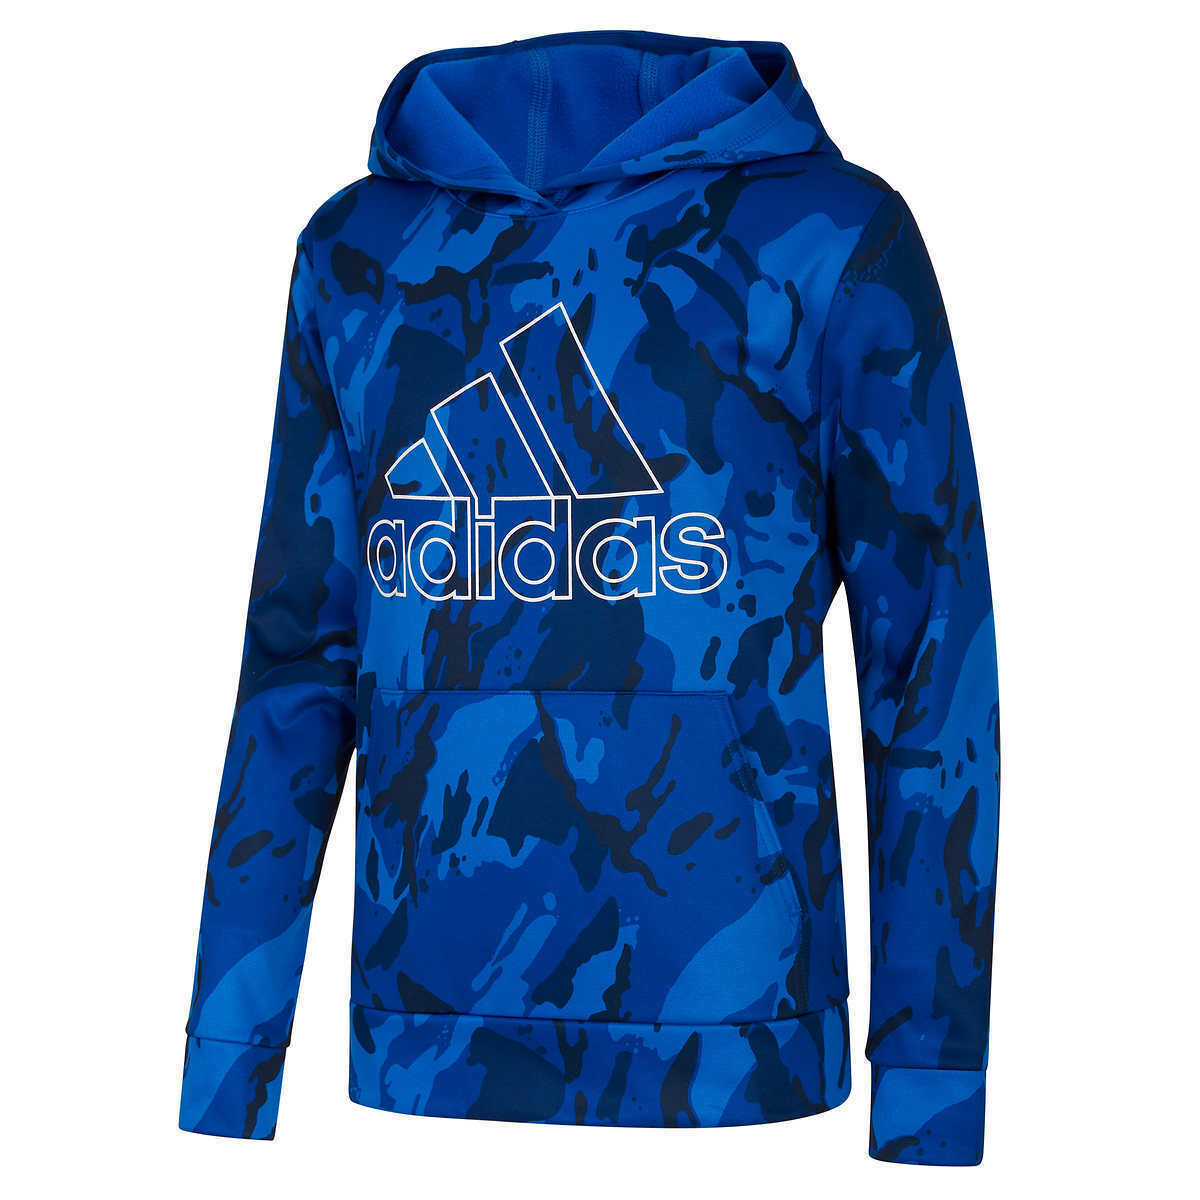 NEW adidas Youth Tech Fleece Hoodie, Blue SELECT SIZE FREE FAST SHIPPING